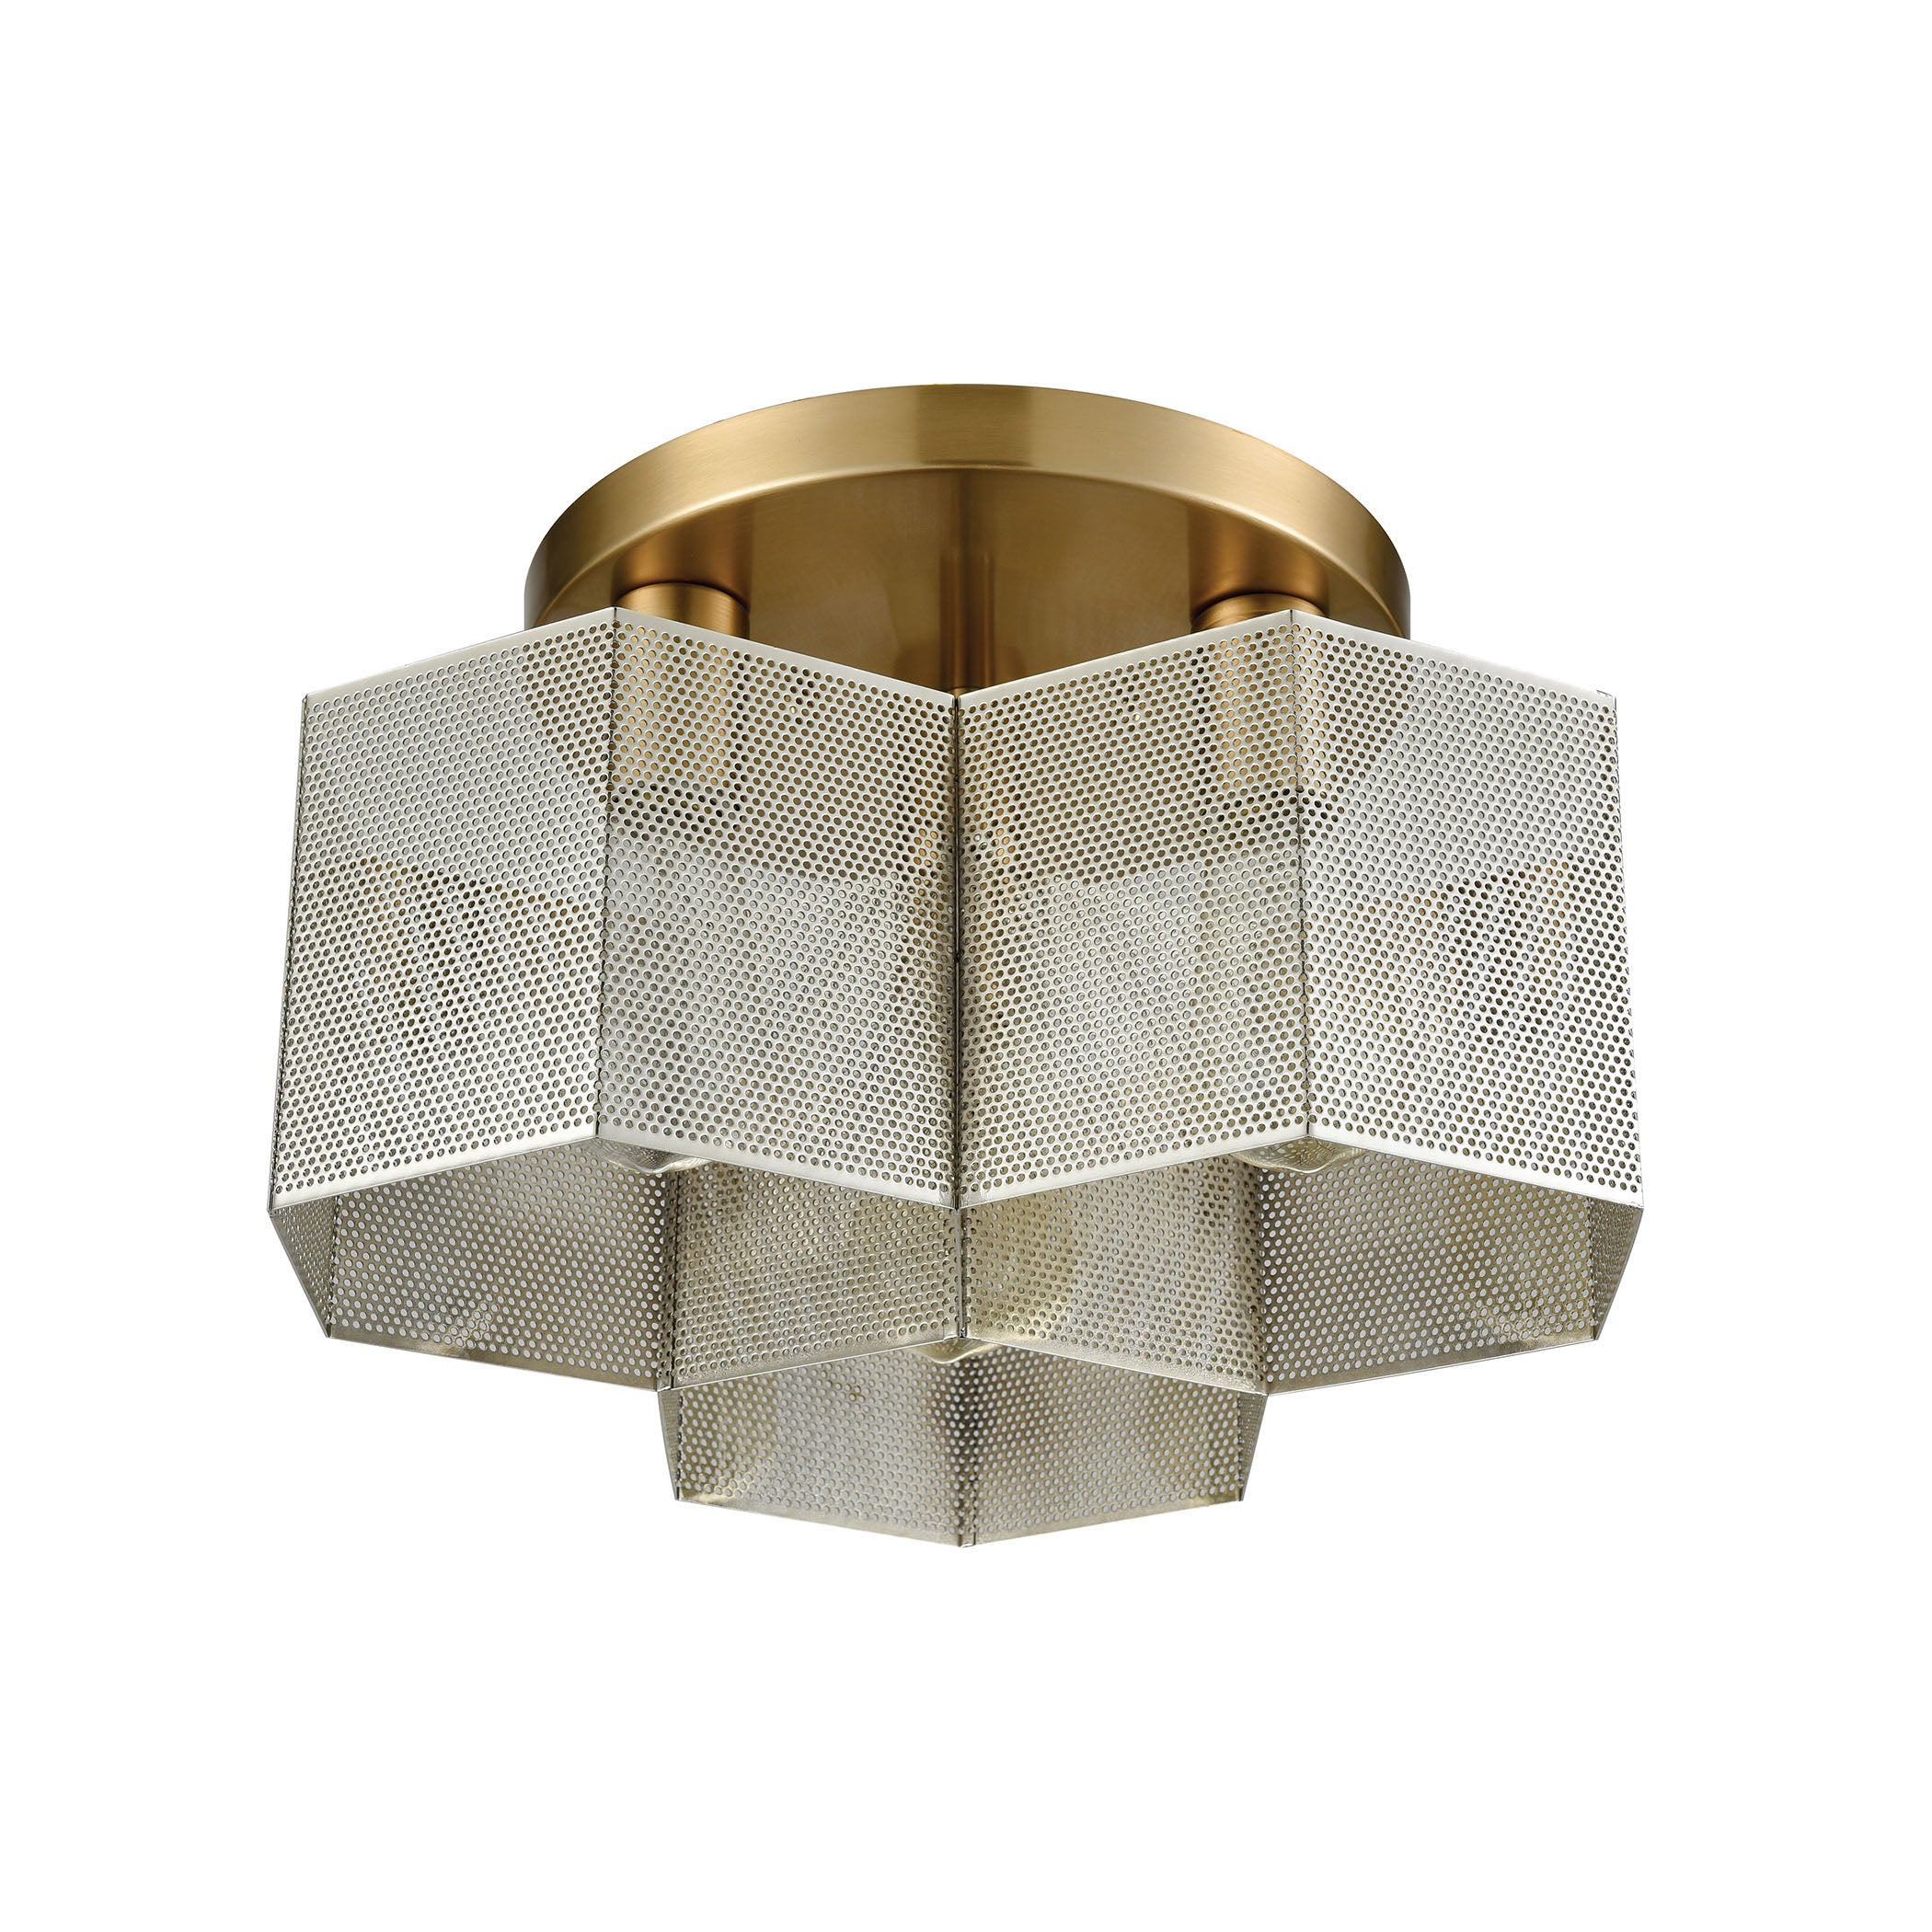 ELK Lighting 21111/3 Compartir 3-Light Semi Flush in Satin Brass with Perforated Metal Shade